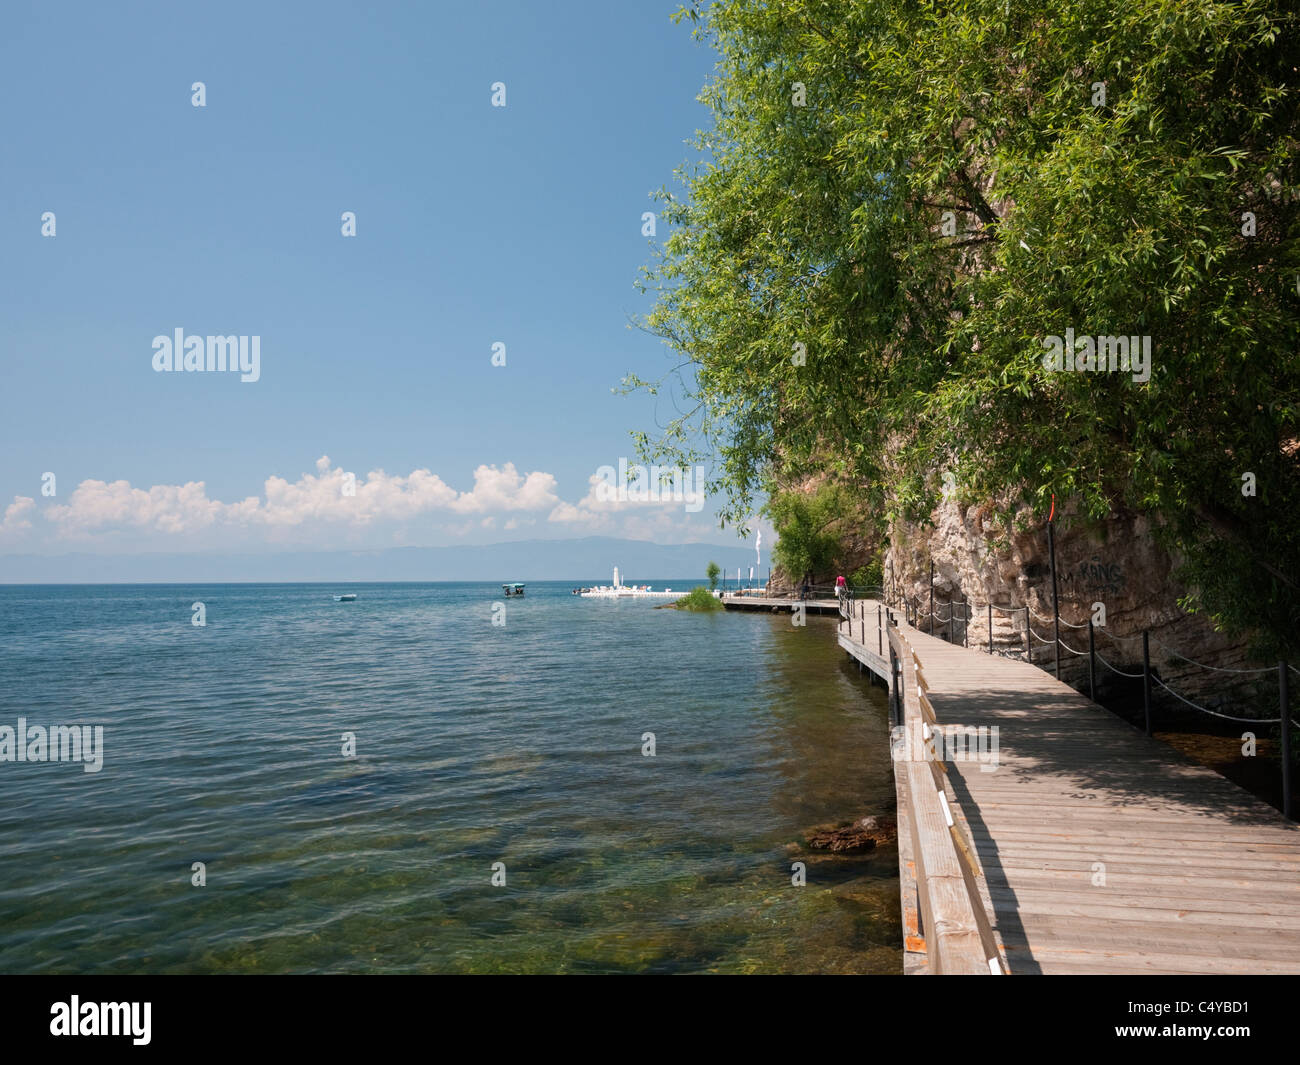 A boardwalk linking Ohrid with the nearby settlement of Kaneo, providing an enjoyable stroll over the waters of Lake Ohrid. Stock Photo